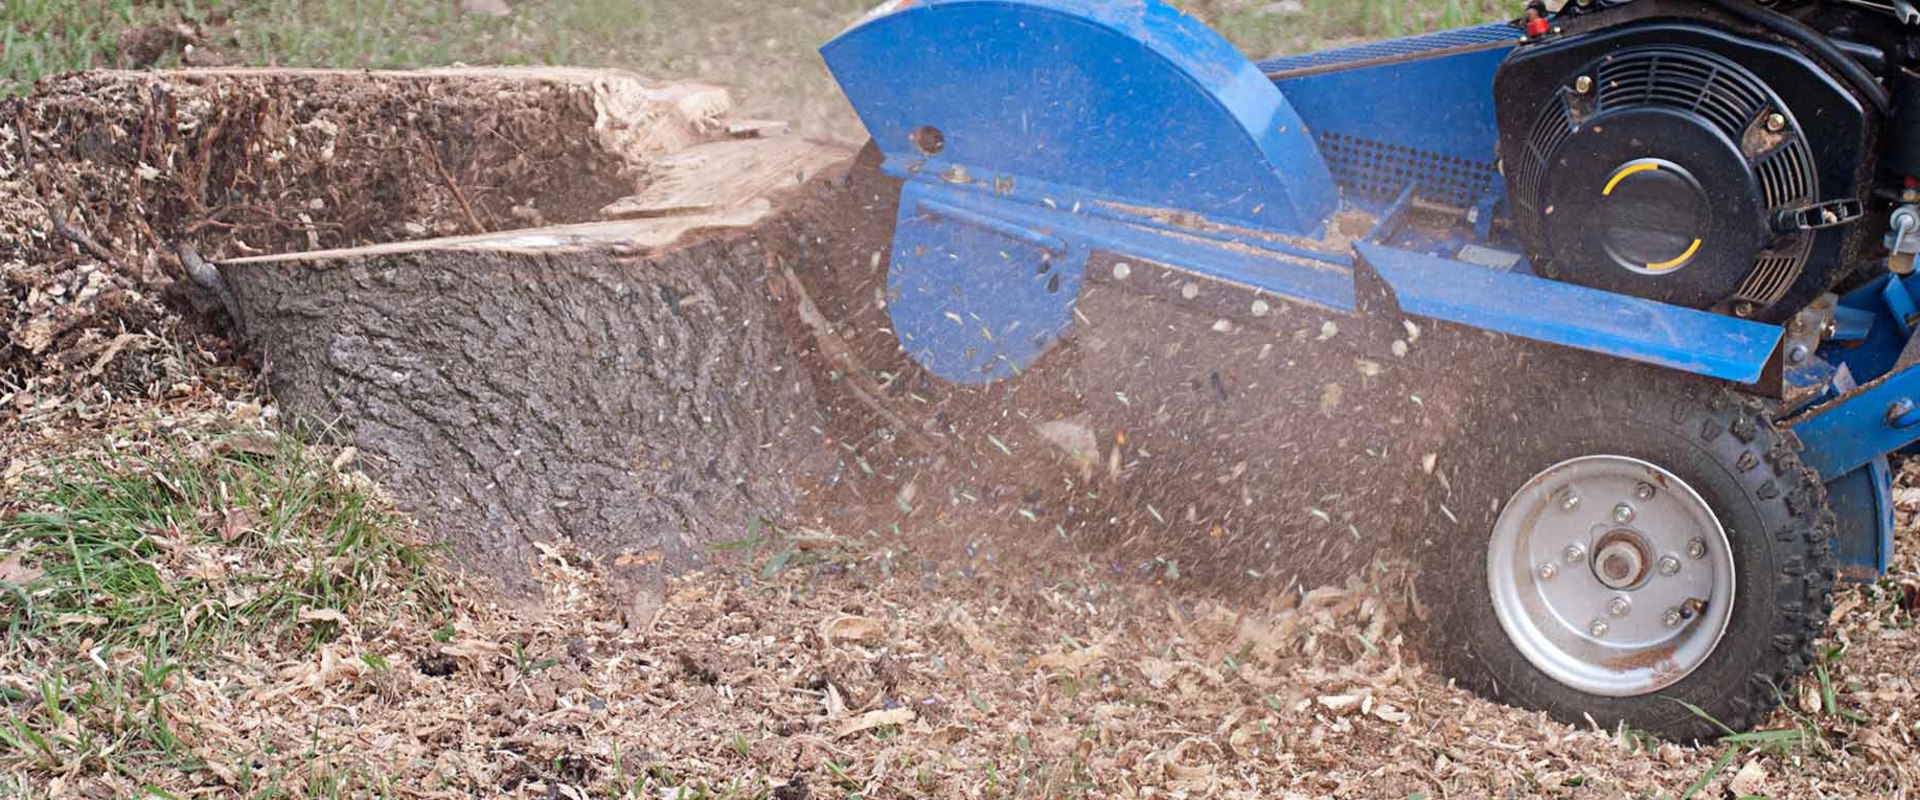 How Much Does Tree Stump Grinding Cost?